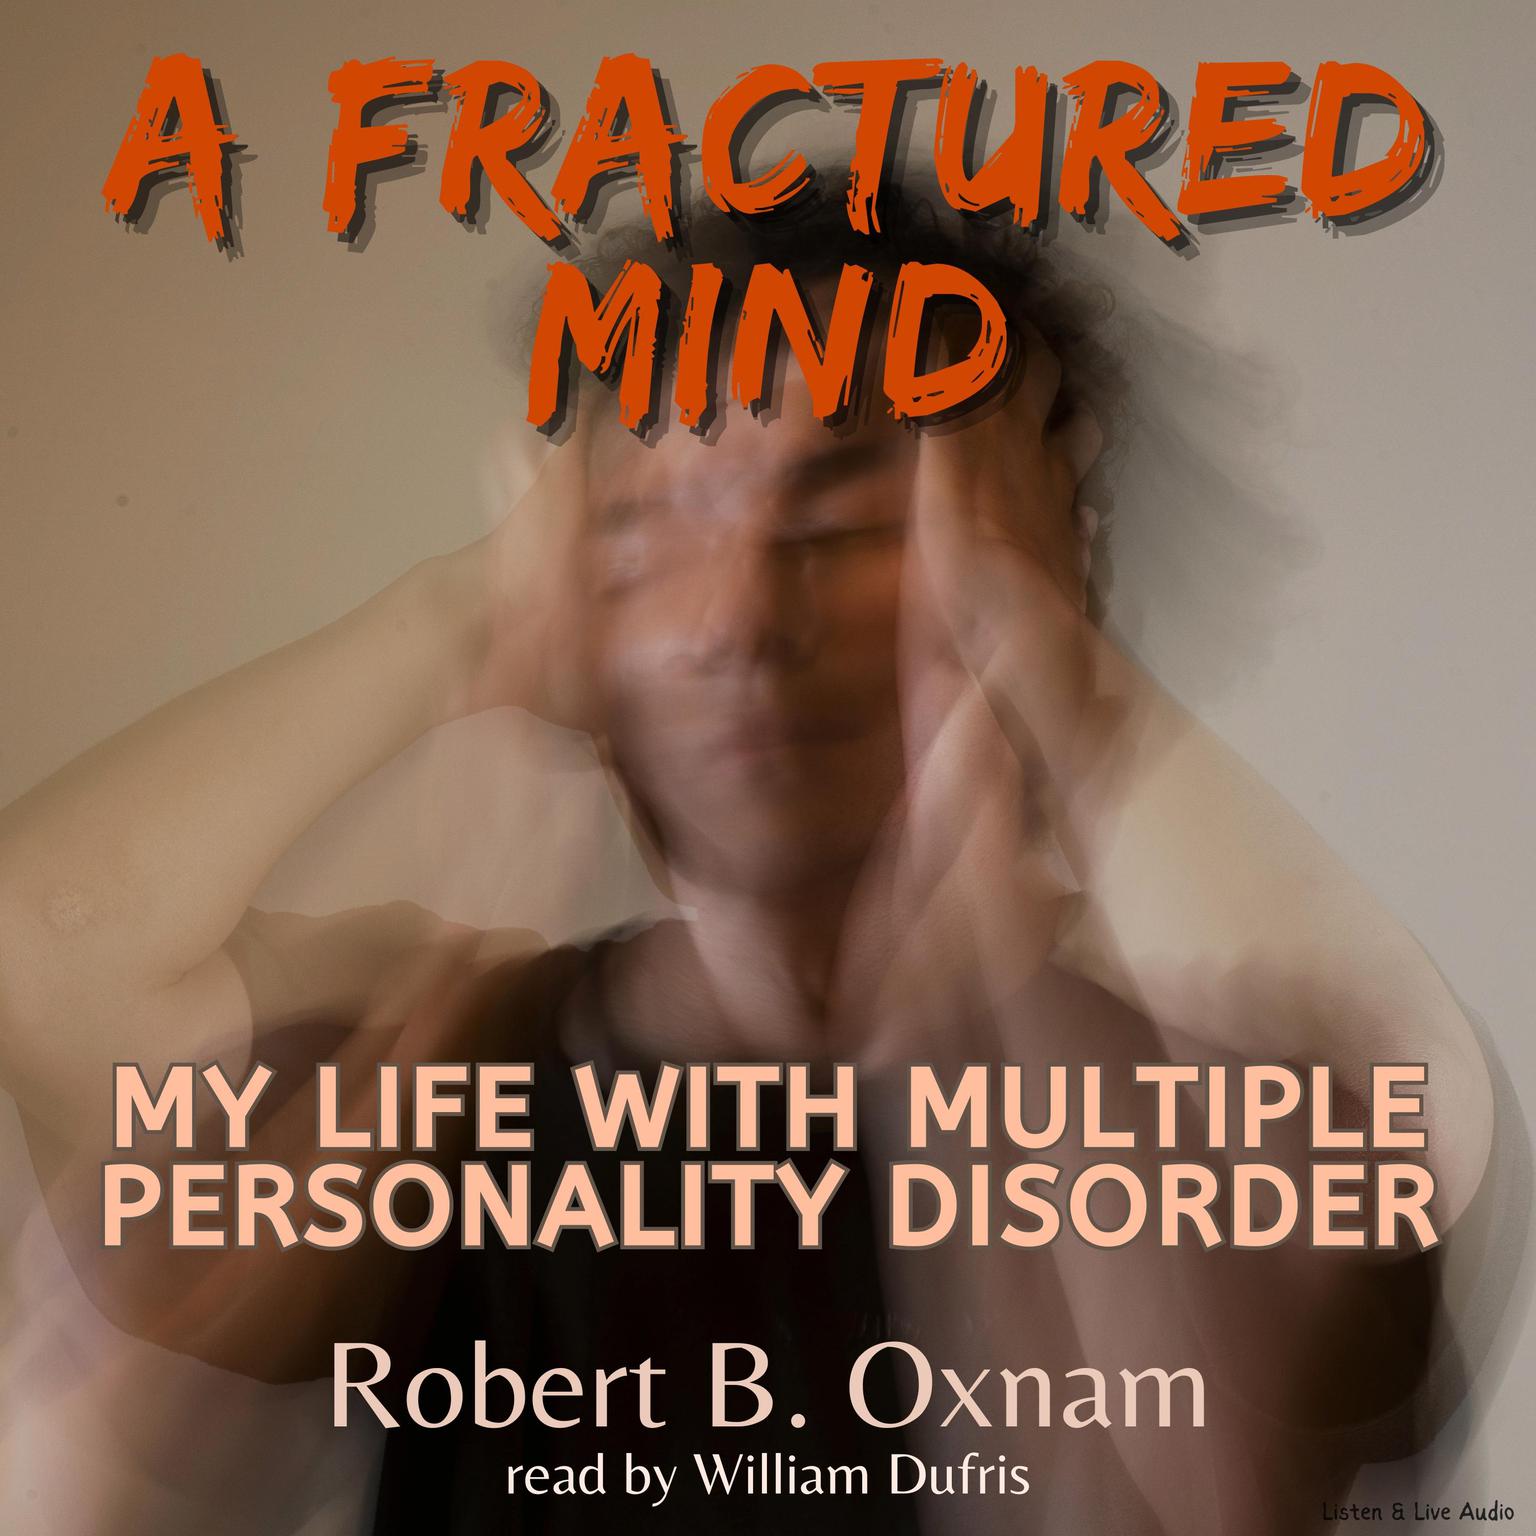 A Fractured Mind: My Life with Multiple Personality Disorder Audiobook, by Robert B. Oxnam